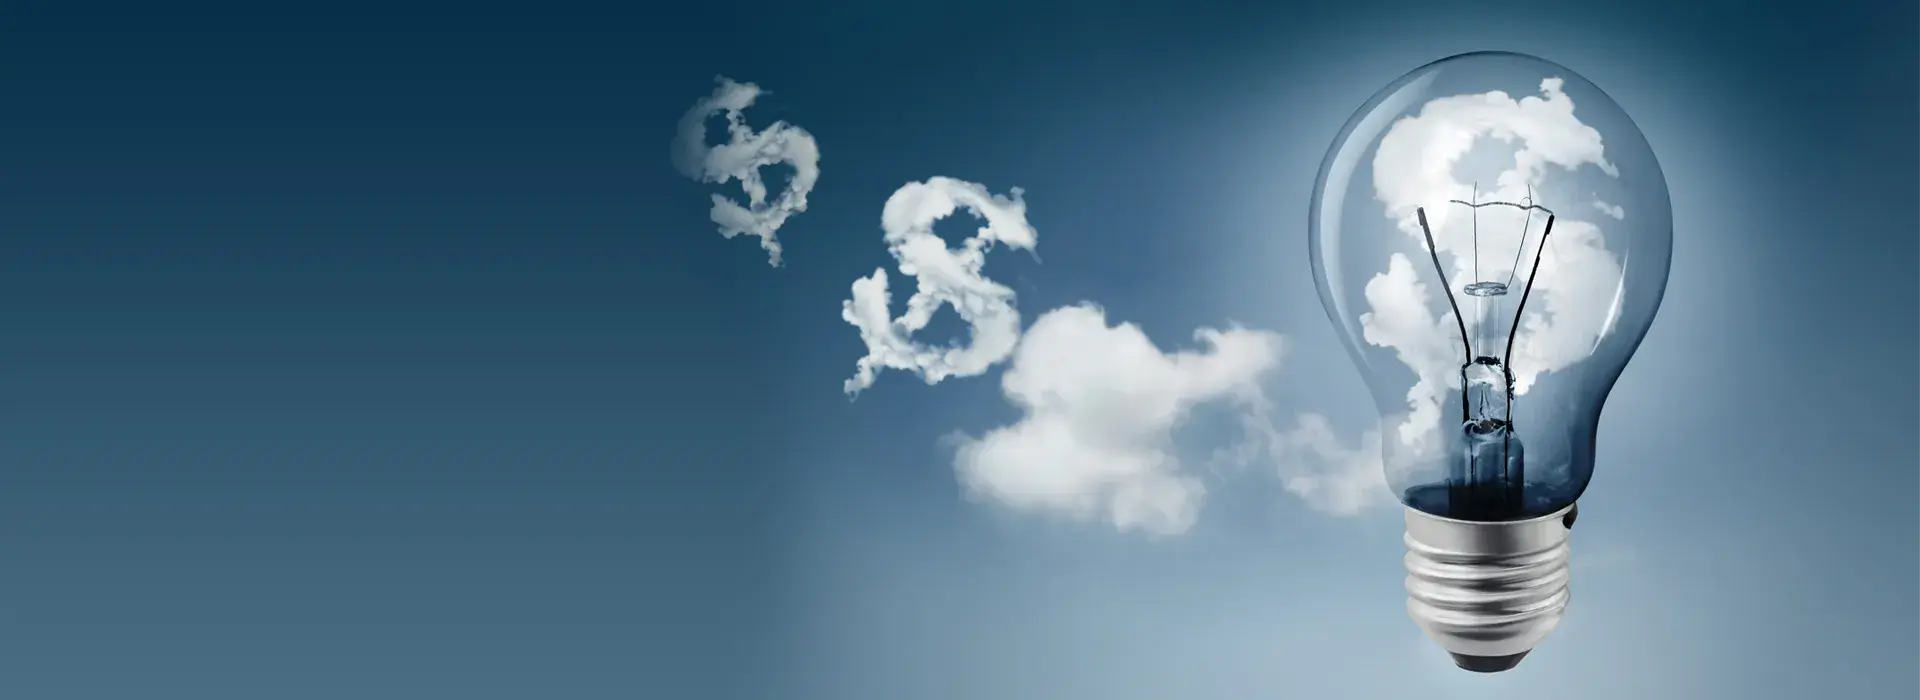 Leverage AWS Cloud to Improve Your ROI And Operational Efficiency